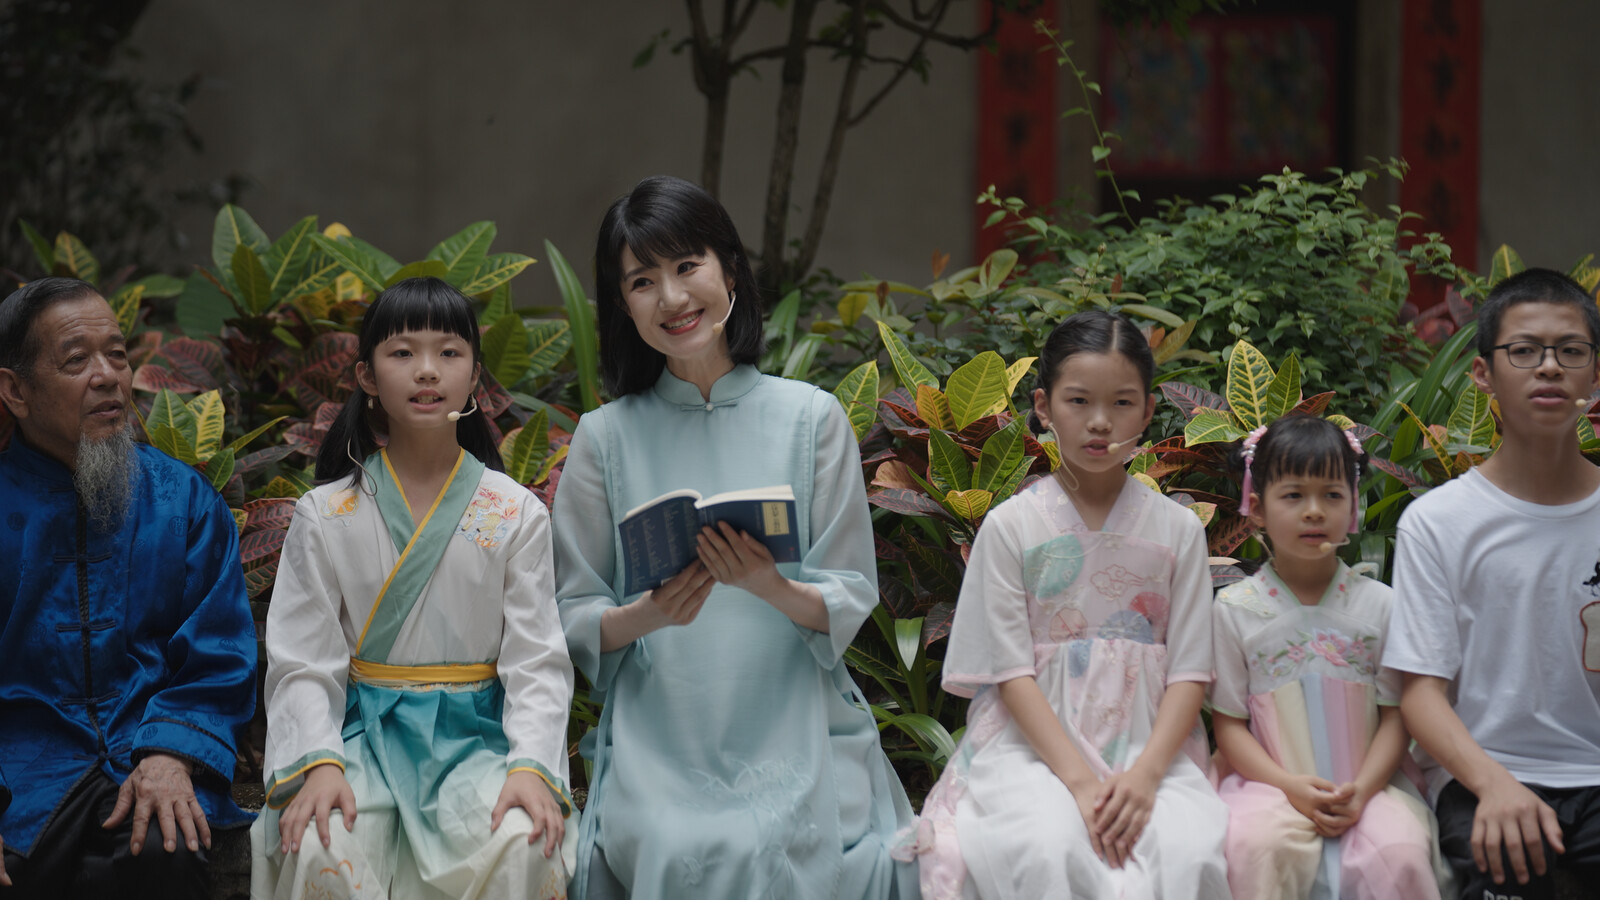 Over 10 mn people tune in to CCTV for "My Life in Books"